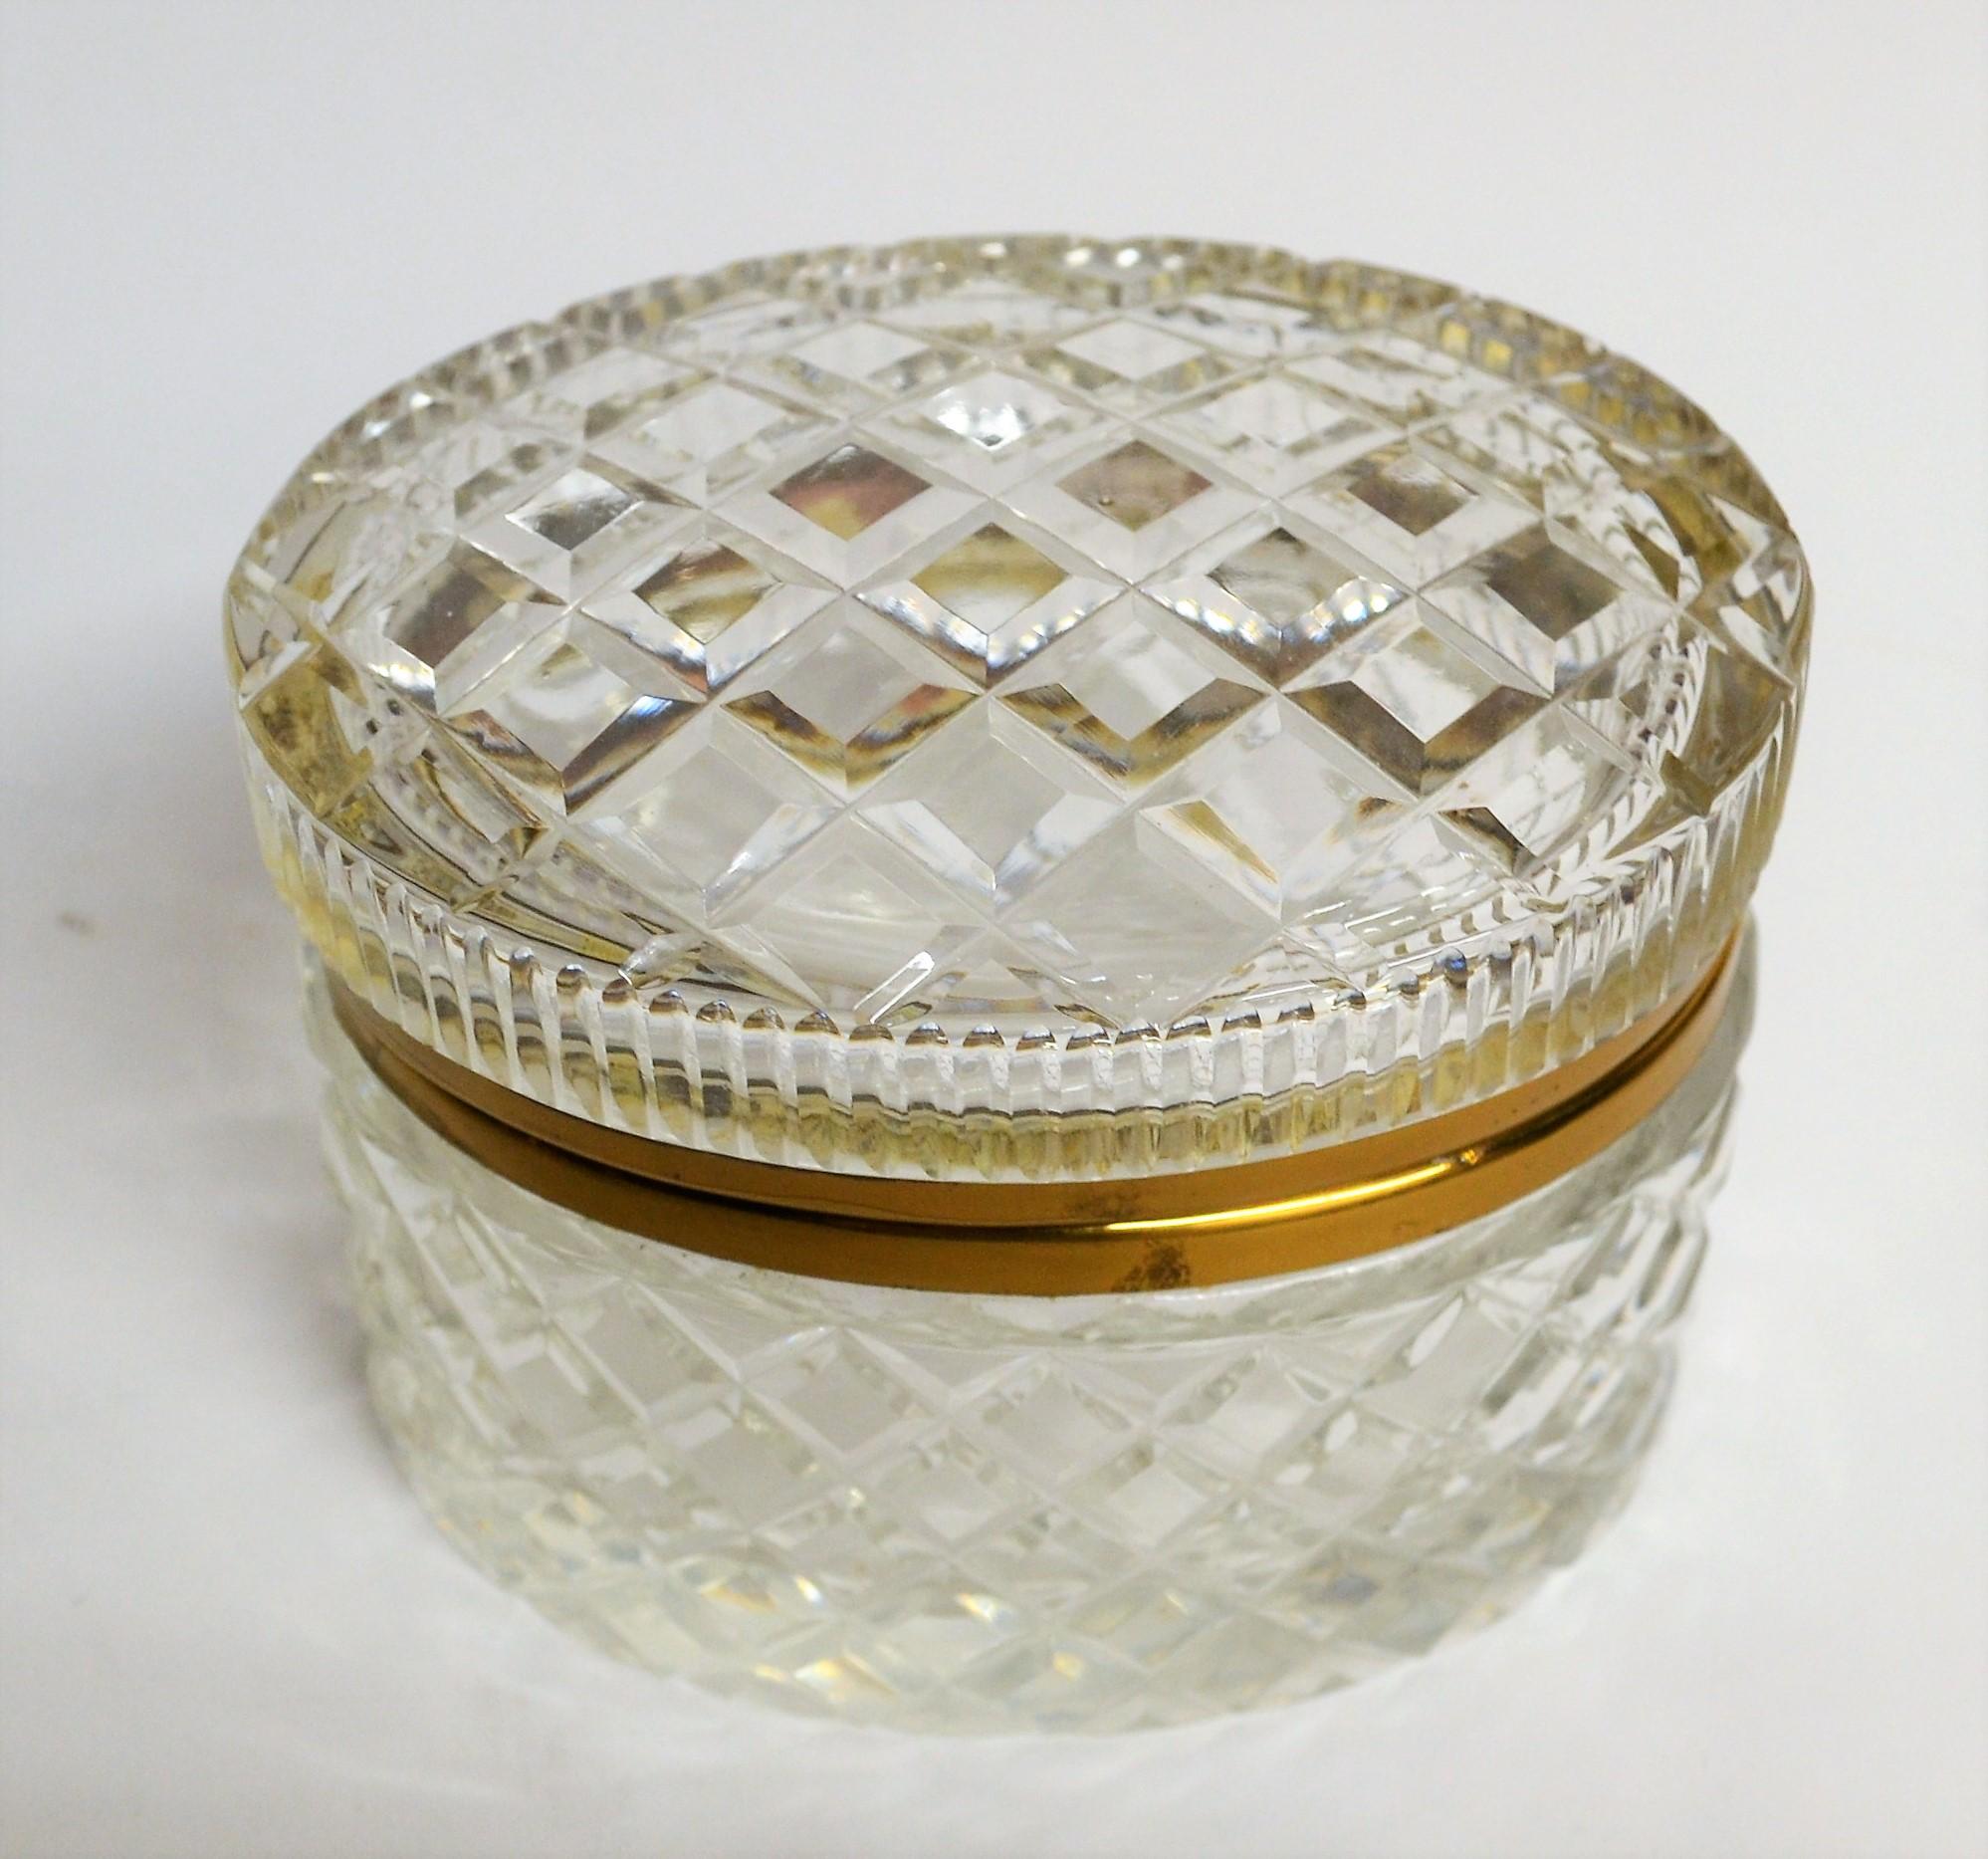 Another charming little crystal box that is glamourous without or without content!